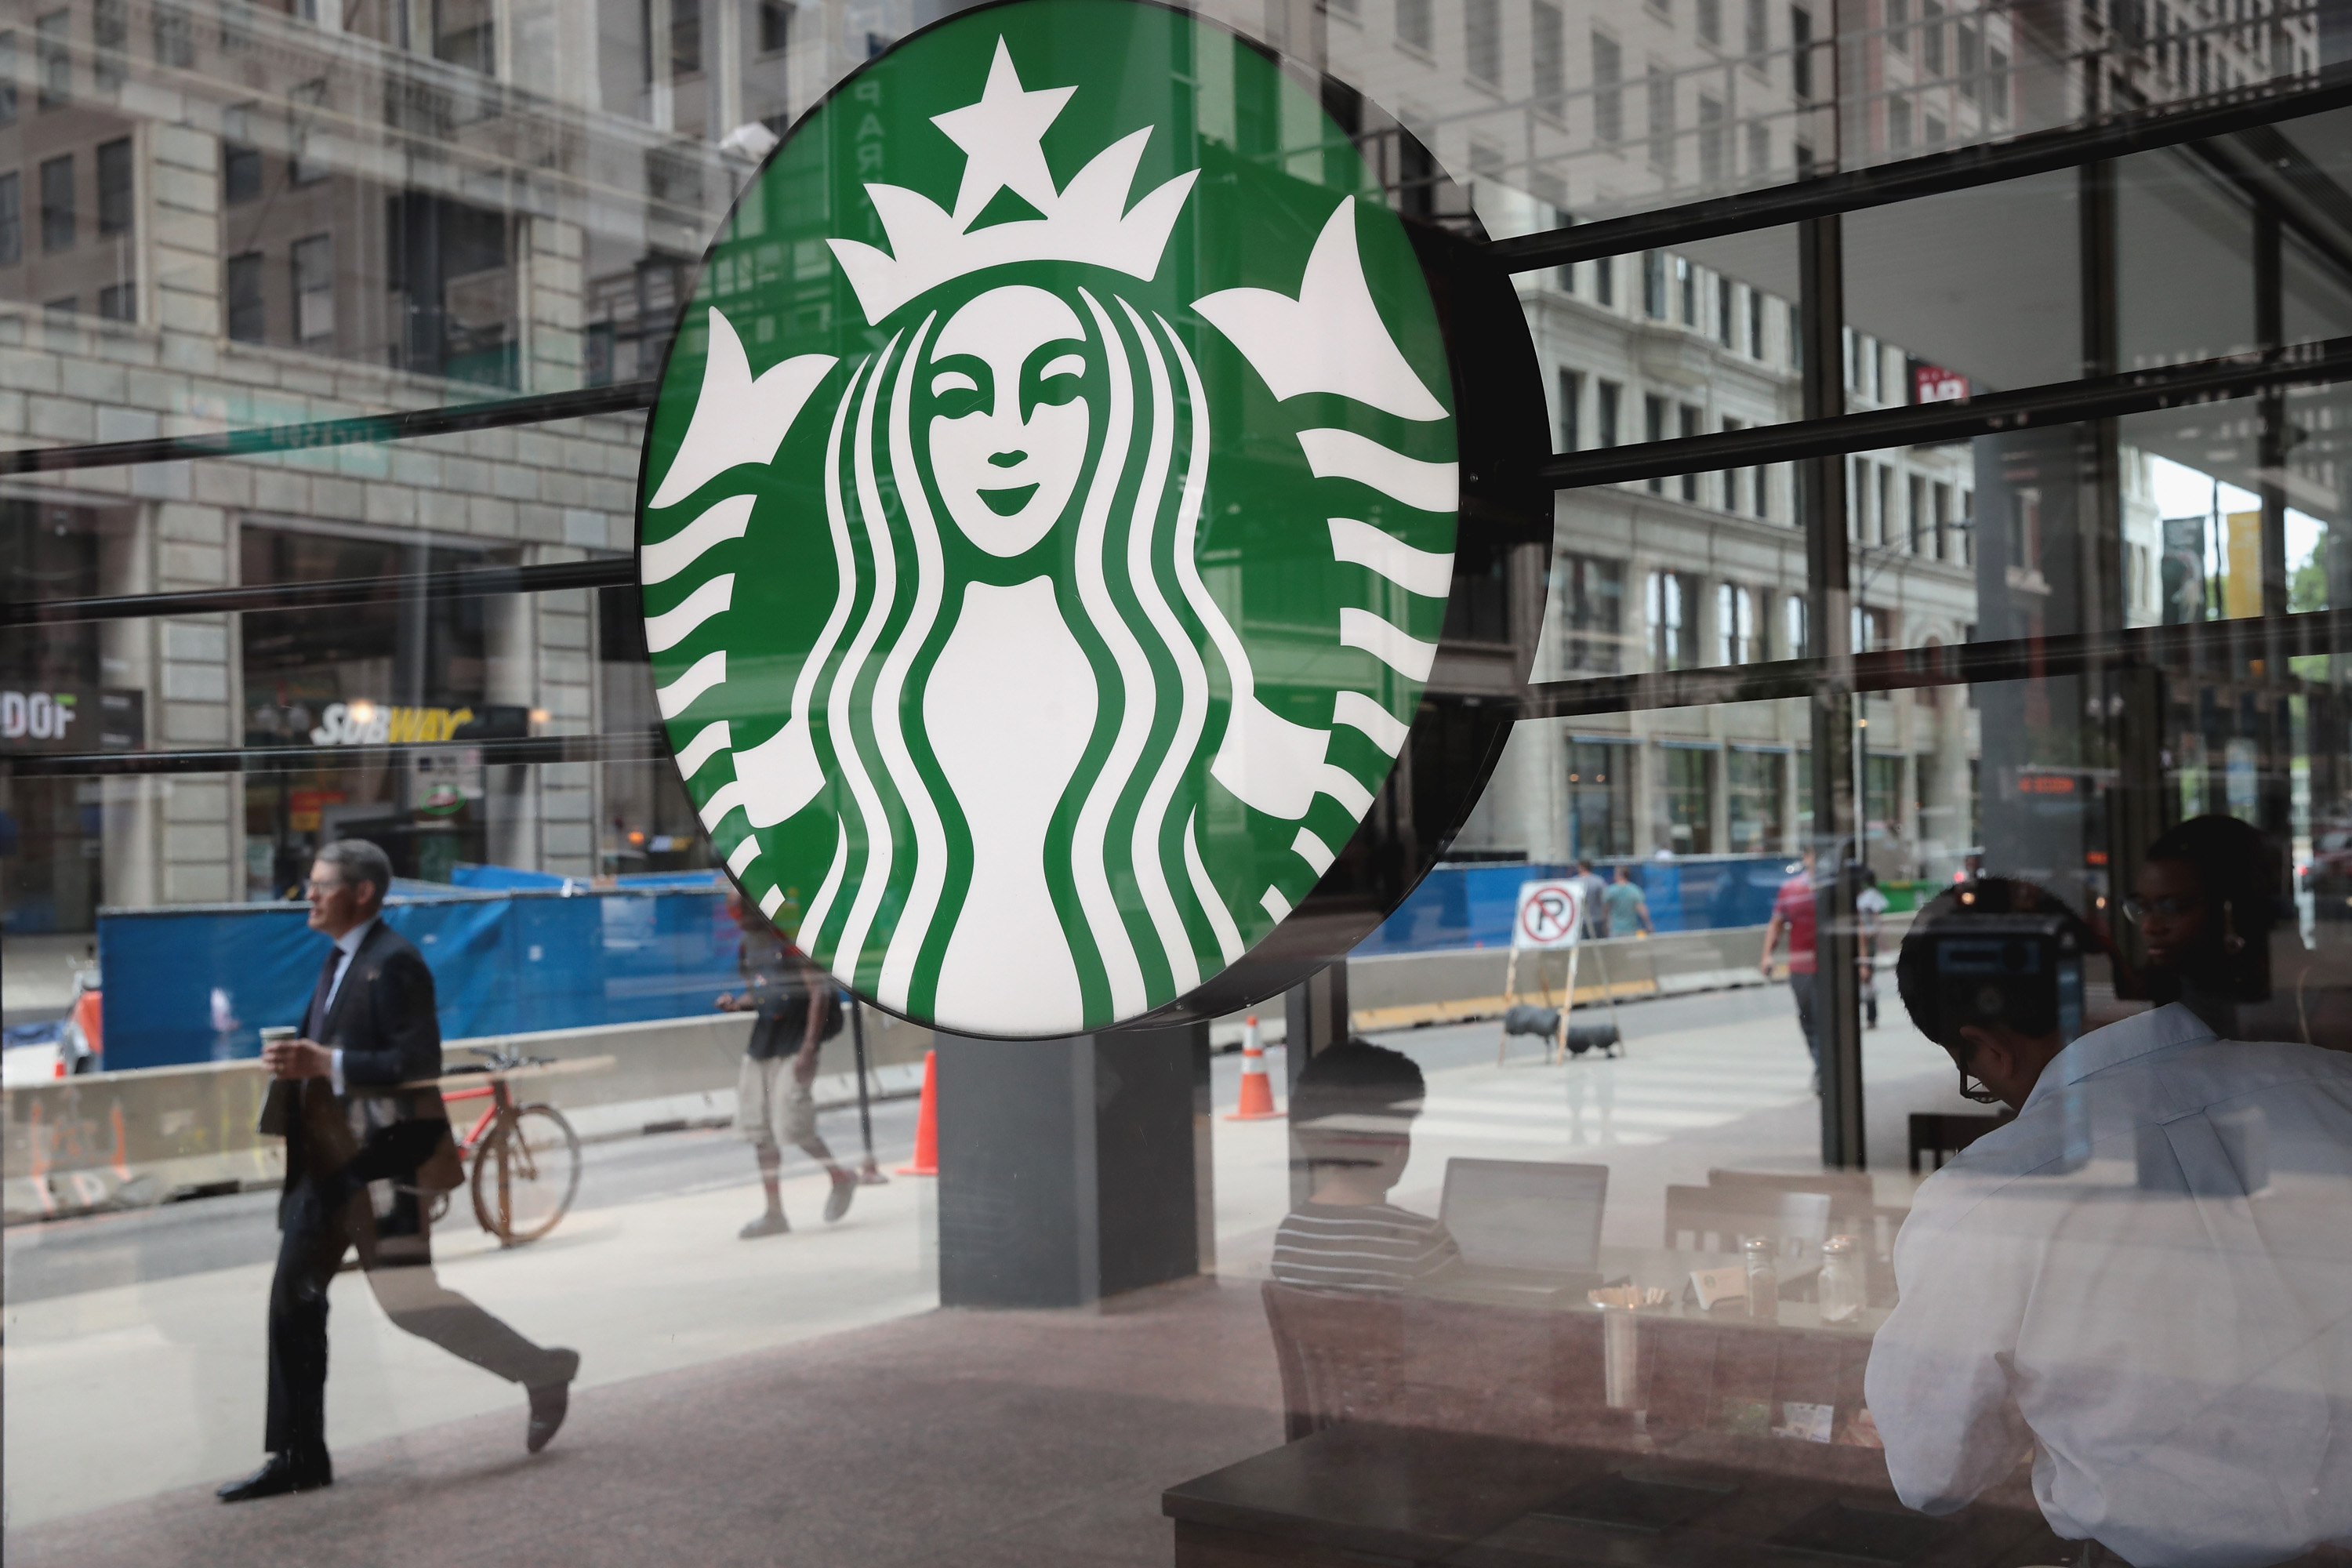 A Chicago Starbucks on May 29, 2018